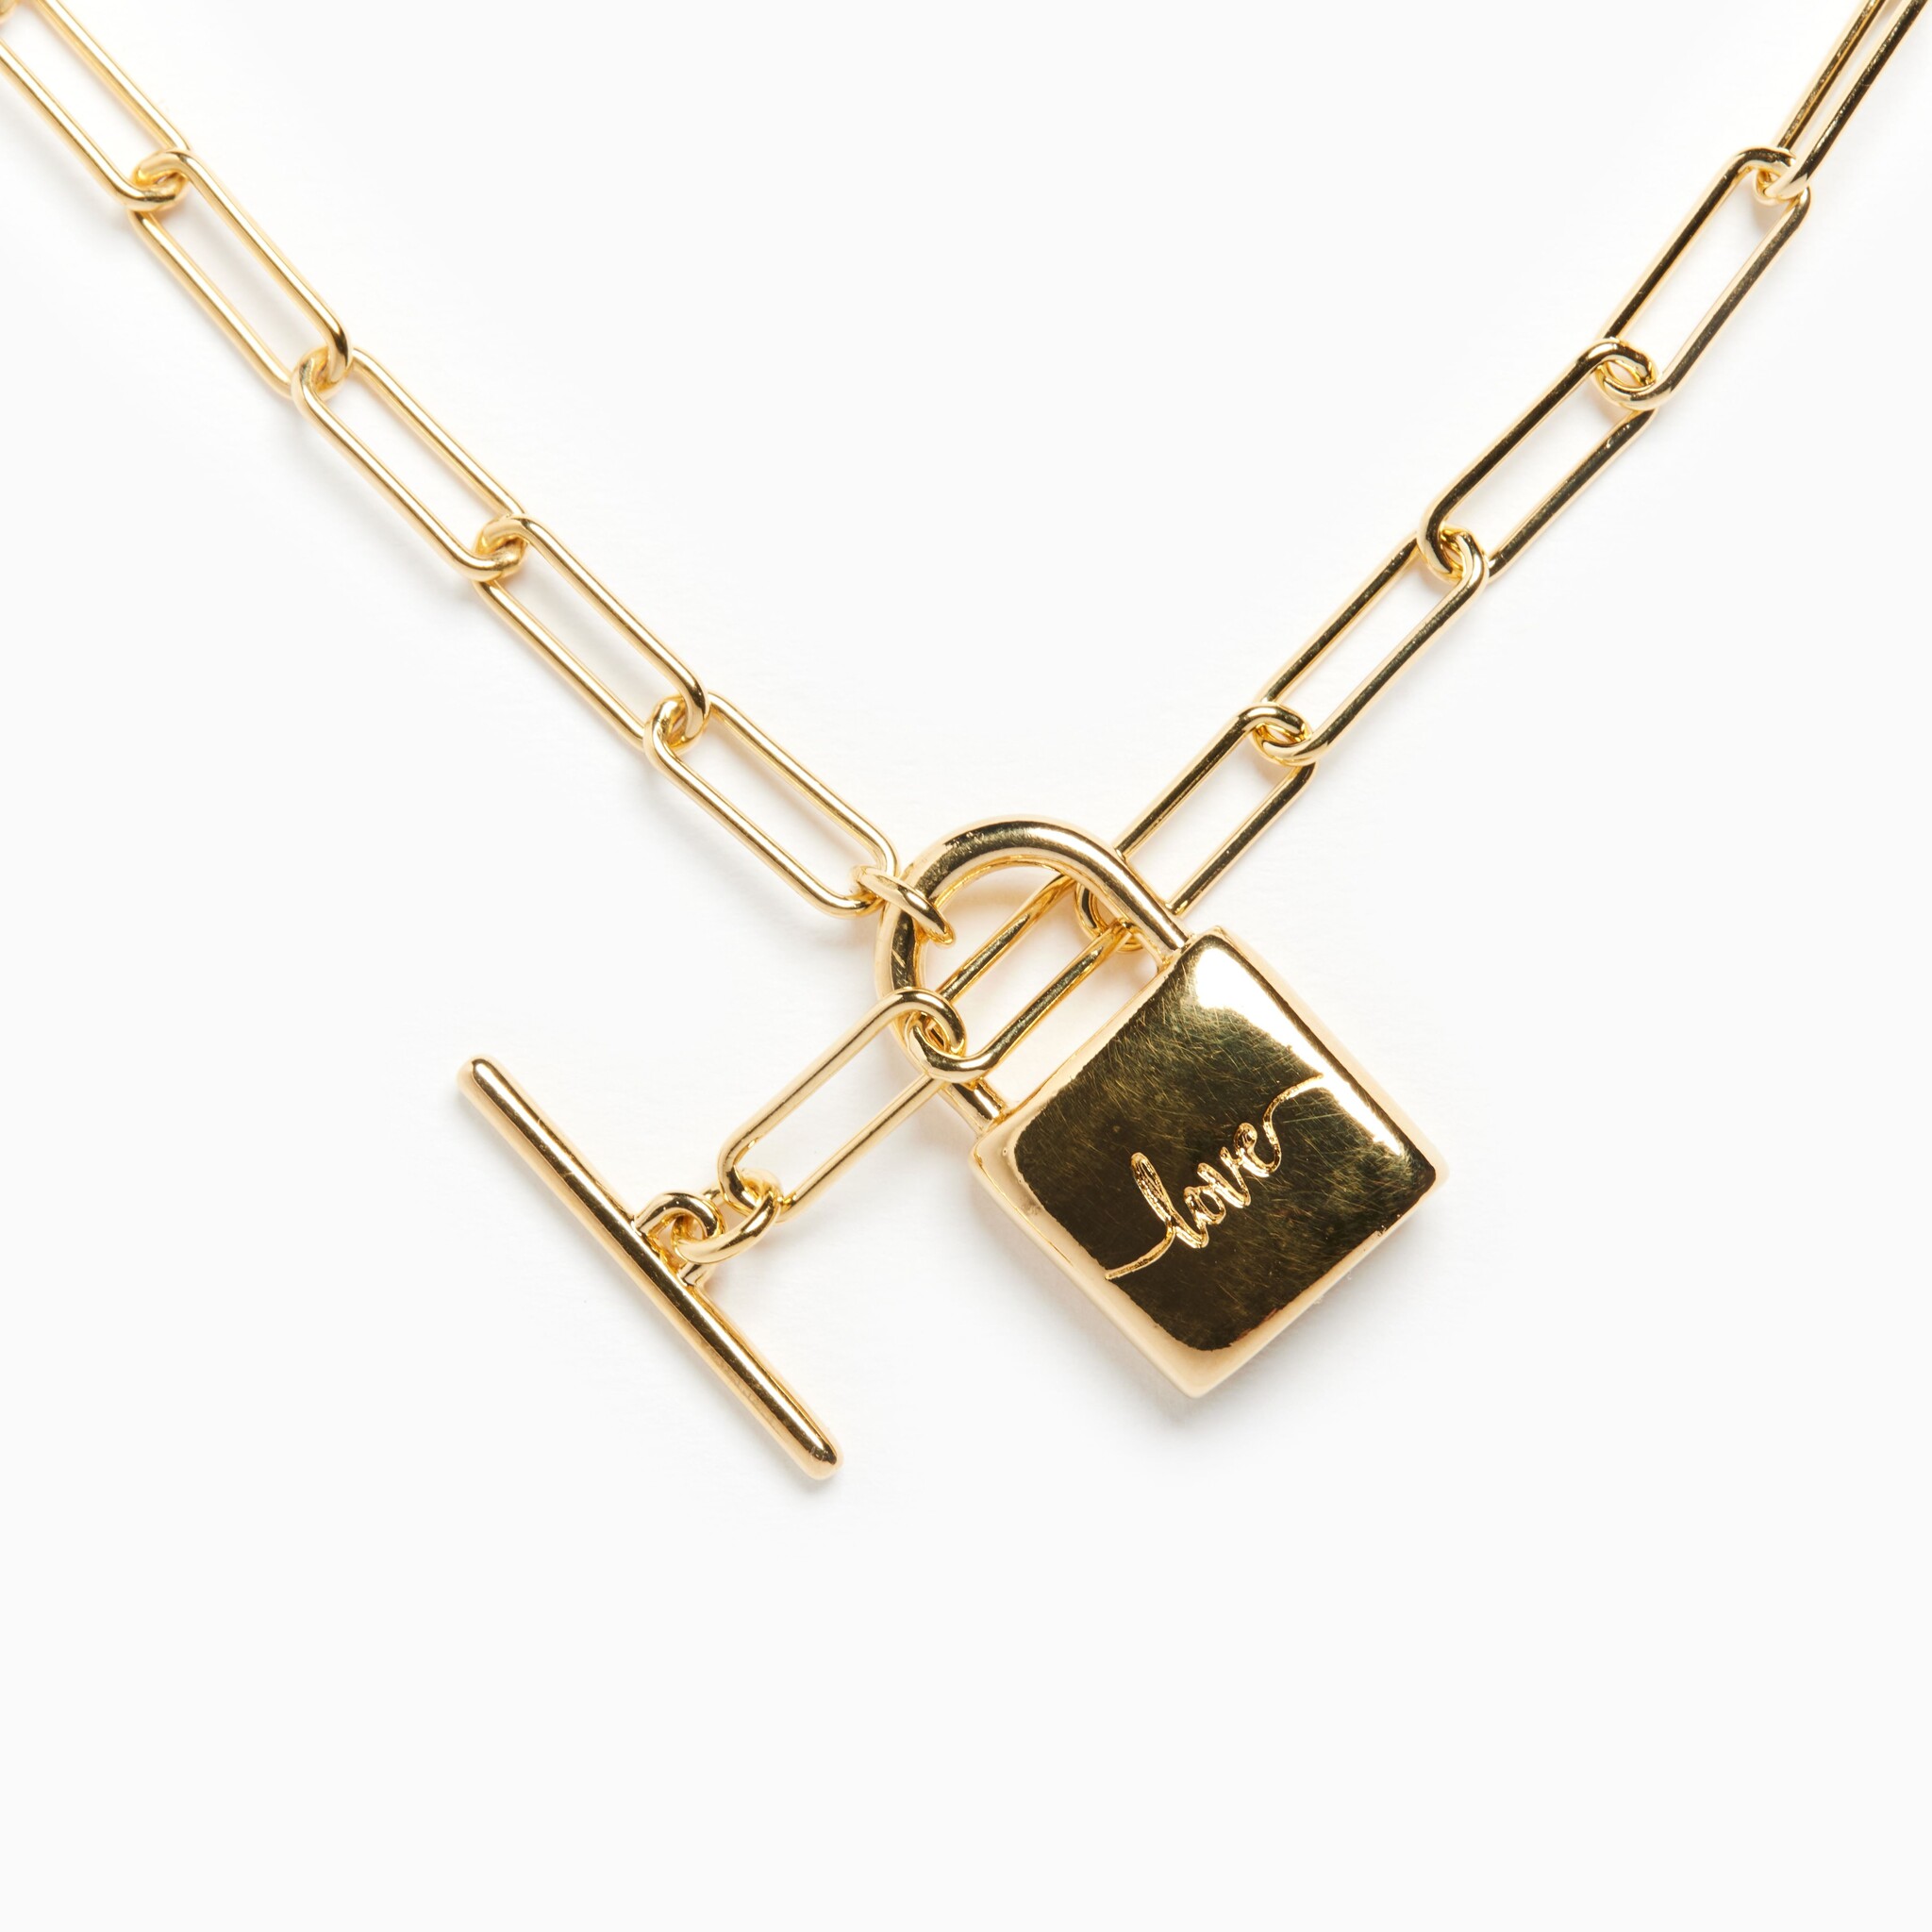 Submissive Necklace Padlock Necklace Antiqued Brass Lock and Chain